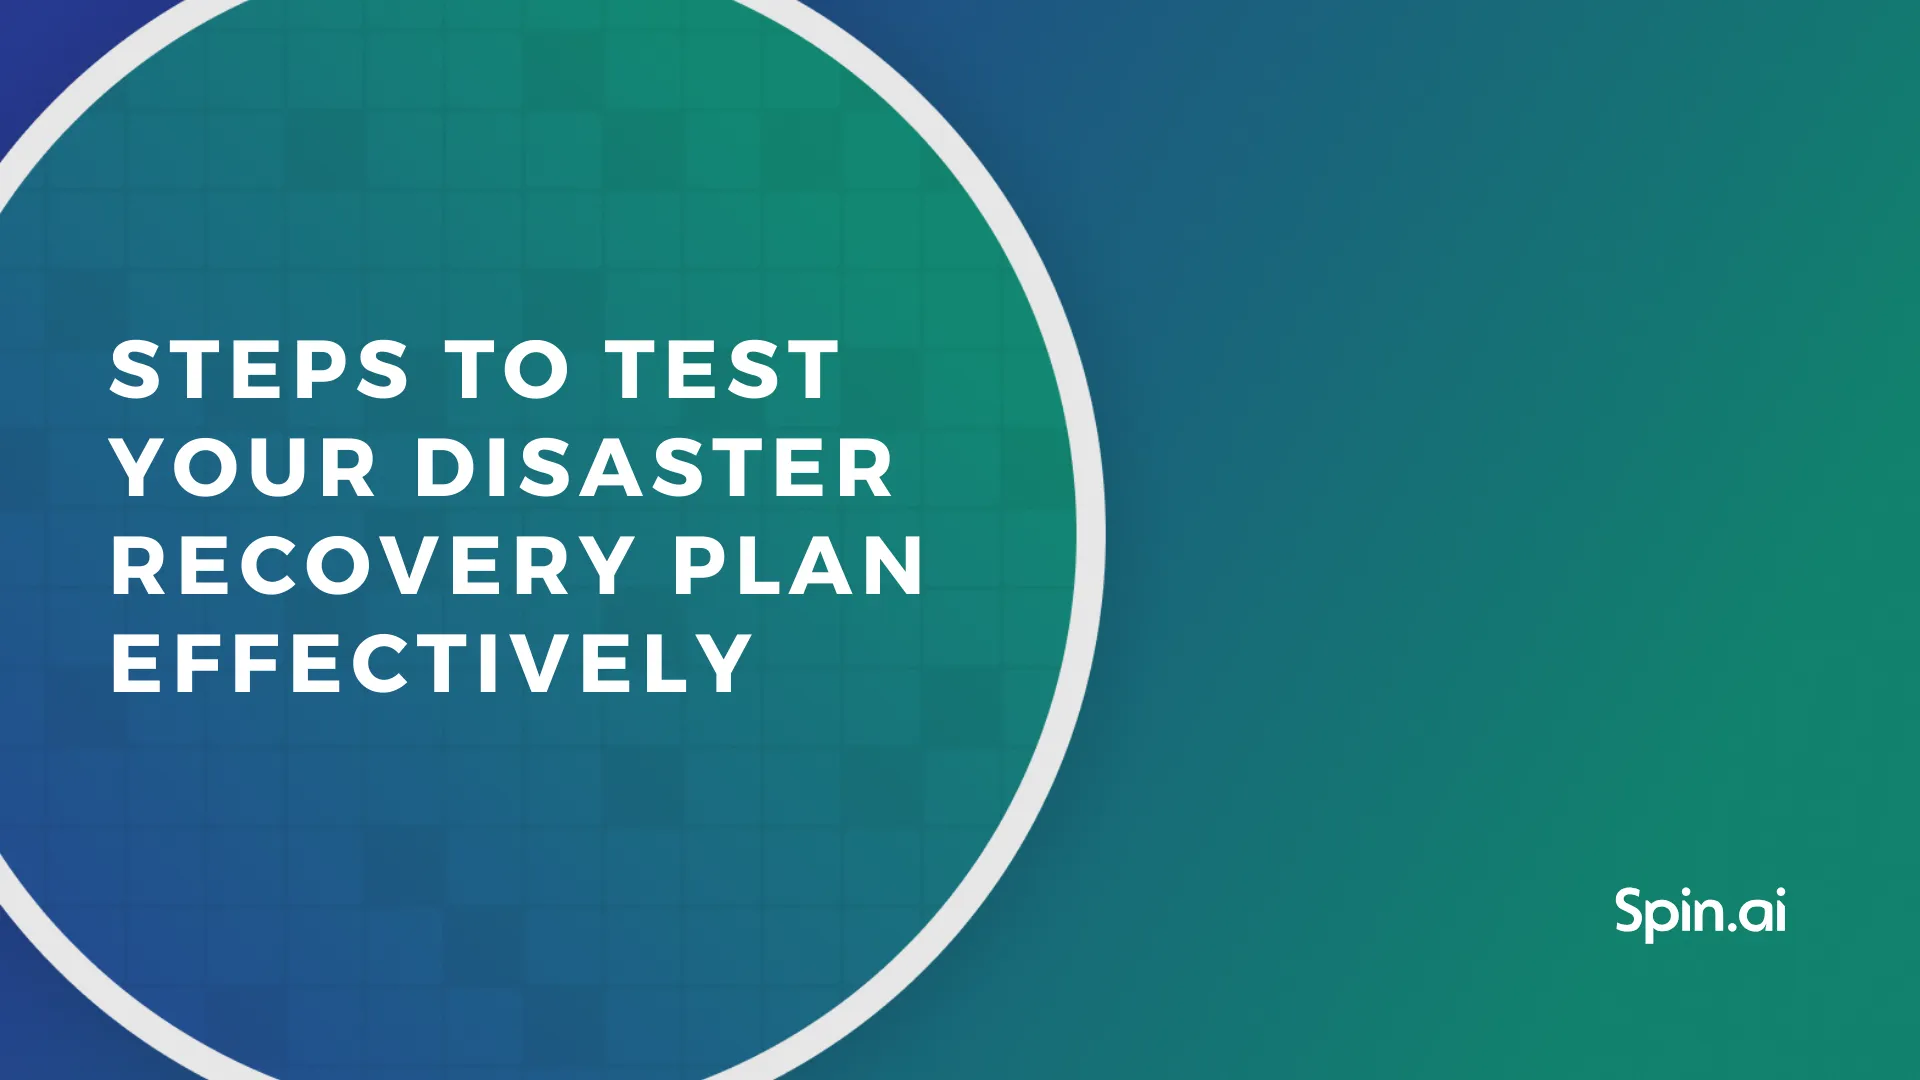 Steps to Test Your Disaster Recovery Plan Effectively